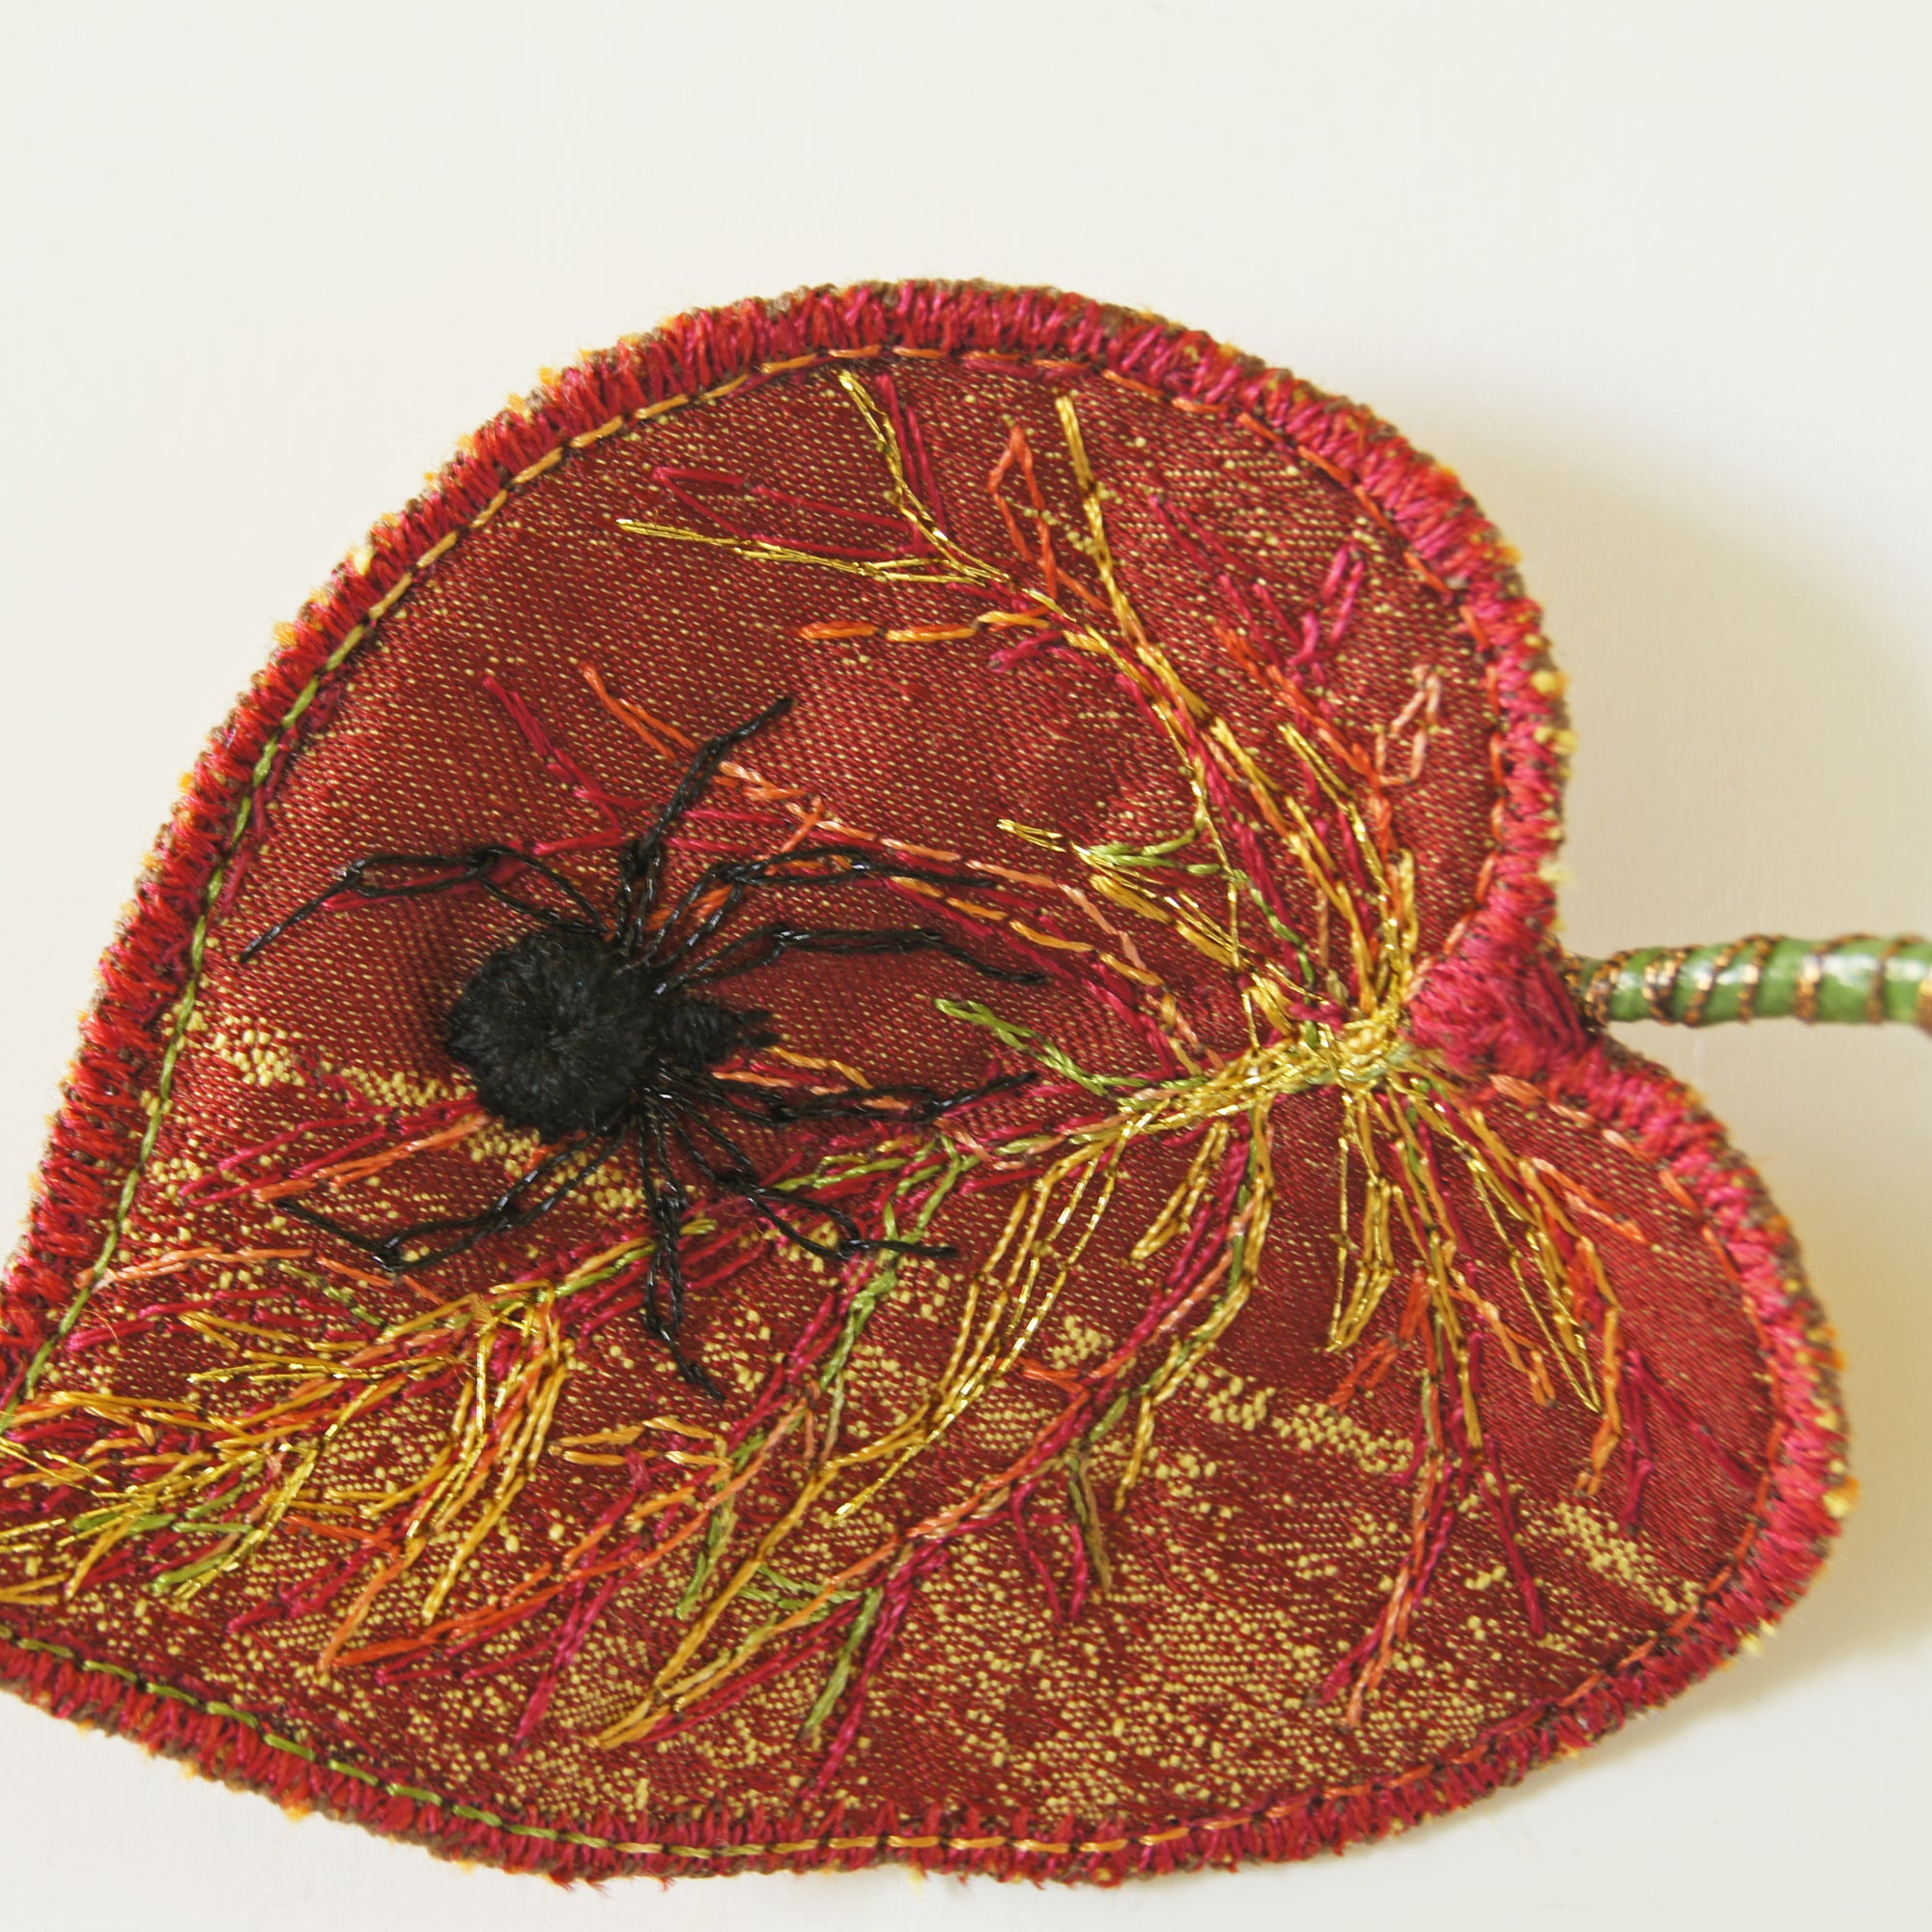 Textile Art Leaves with Embroidered Spider